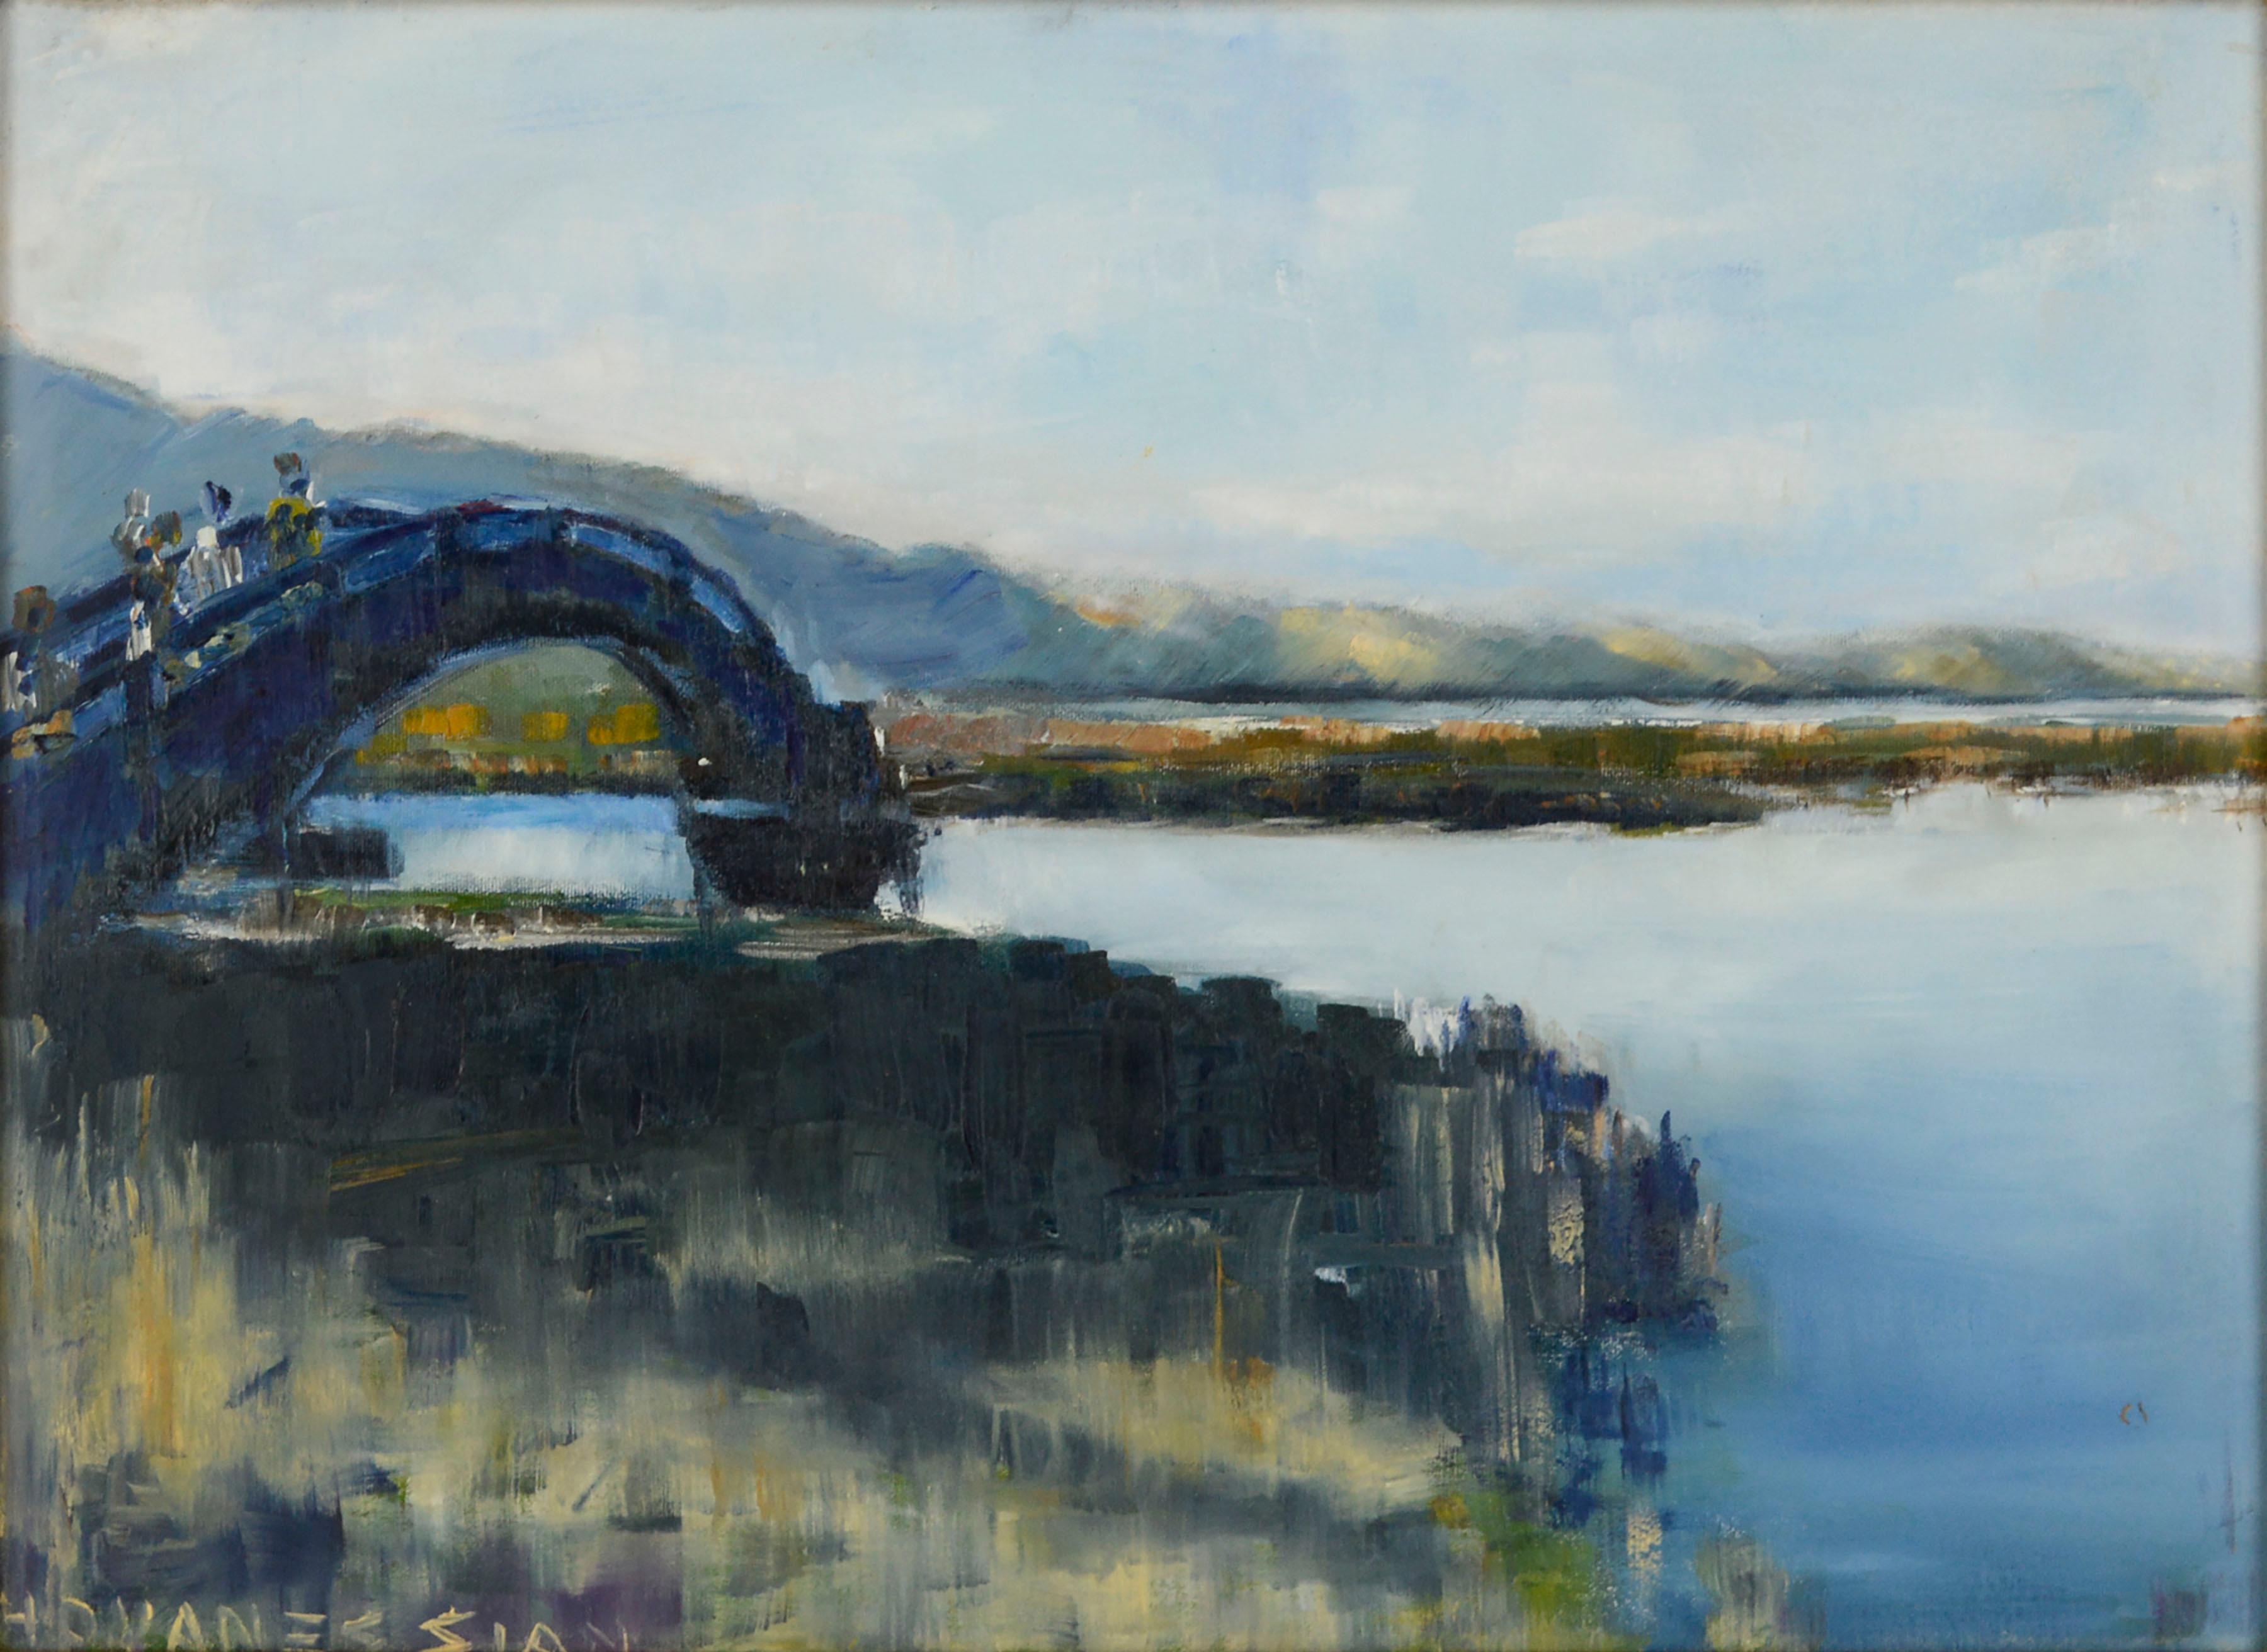 Over the Bridge, Armenia - Mid Century Figurative Landscape  - Painting by Hovanessian